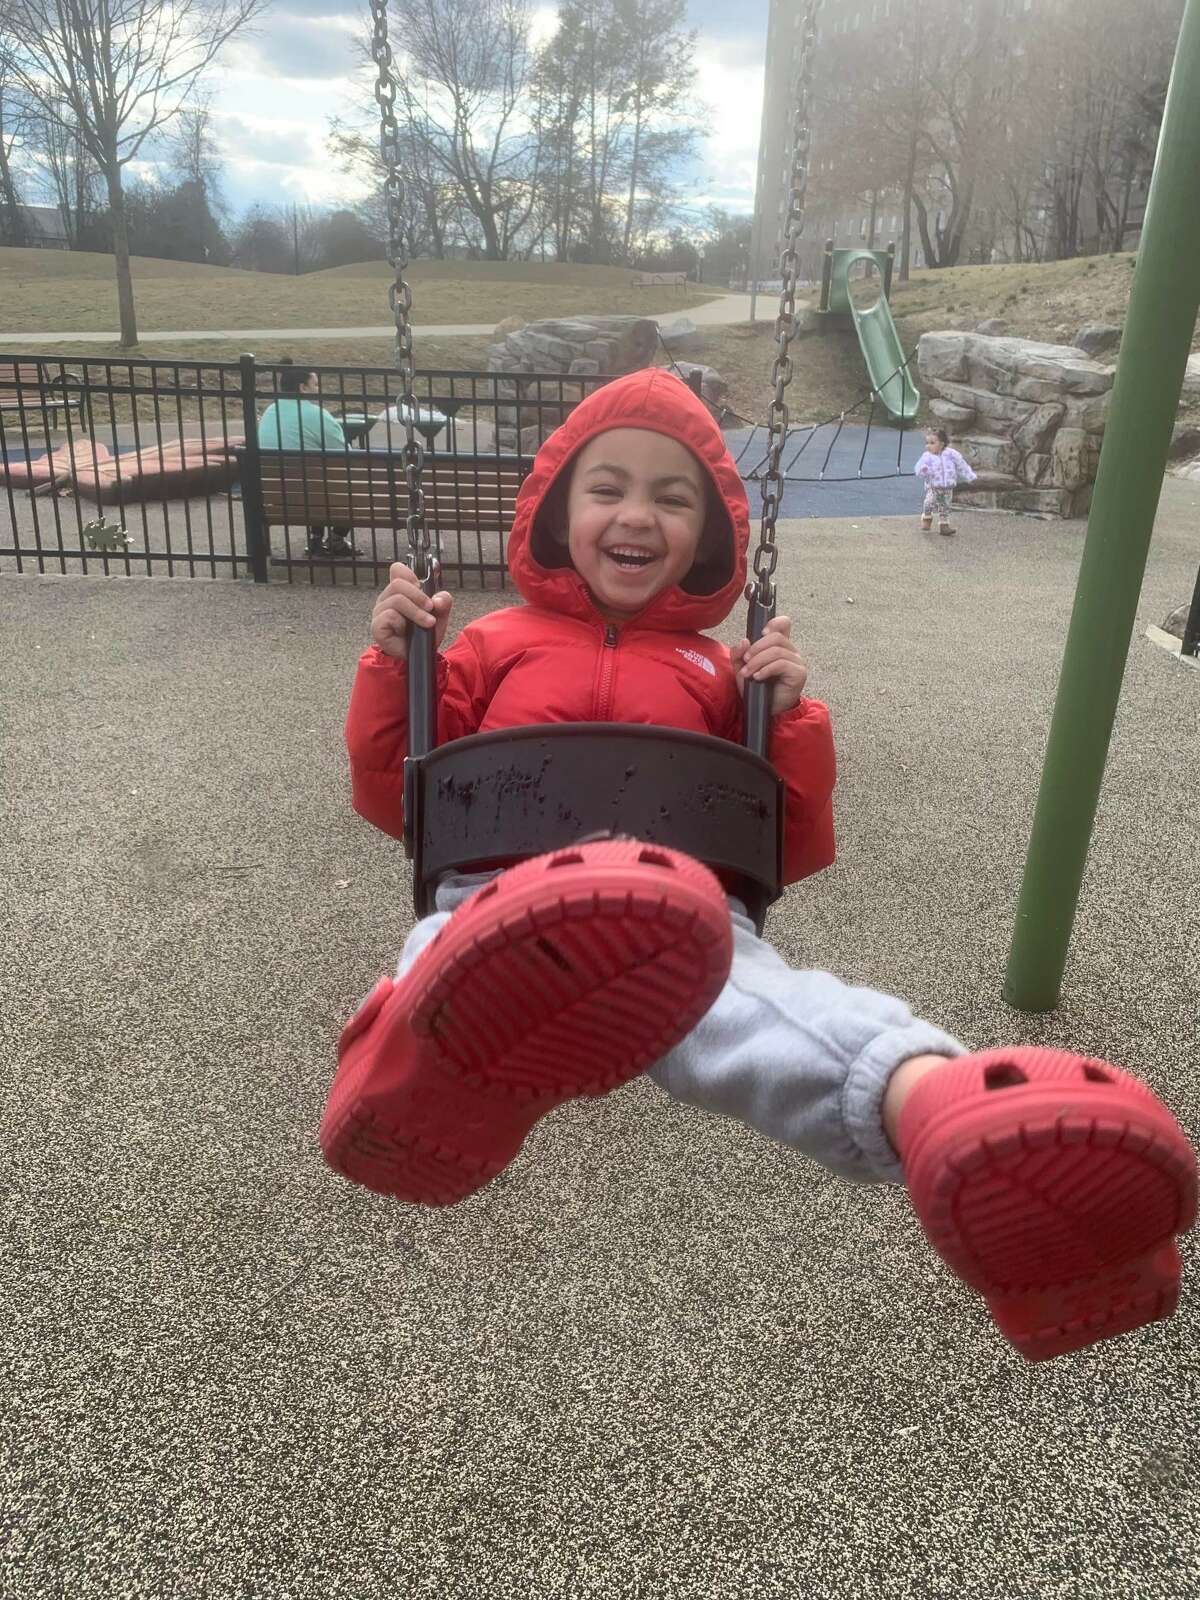 Noah Rodgriguez, 4, died Friday at Yale New Haven Hospital from injuries he sustained in a Bridgeport crash on March 6 that also killed his aunt, his family said.